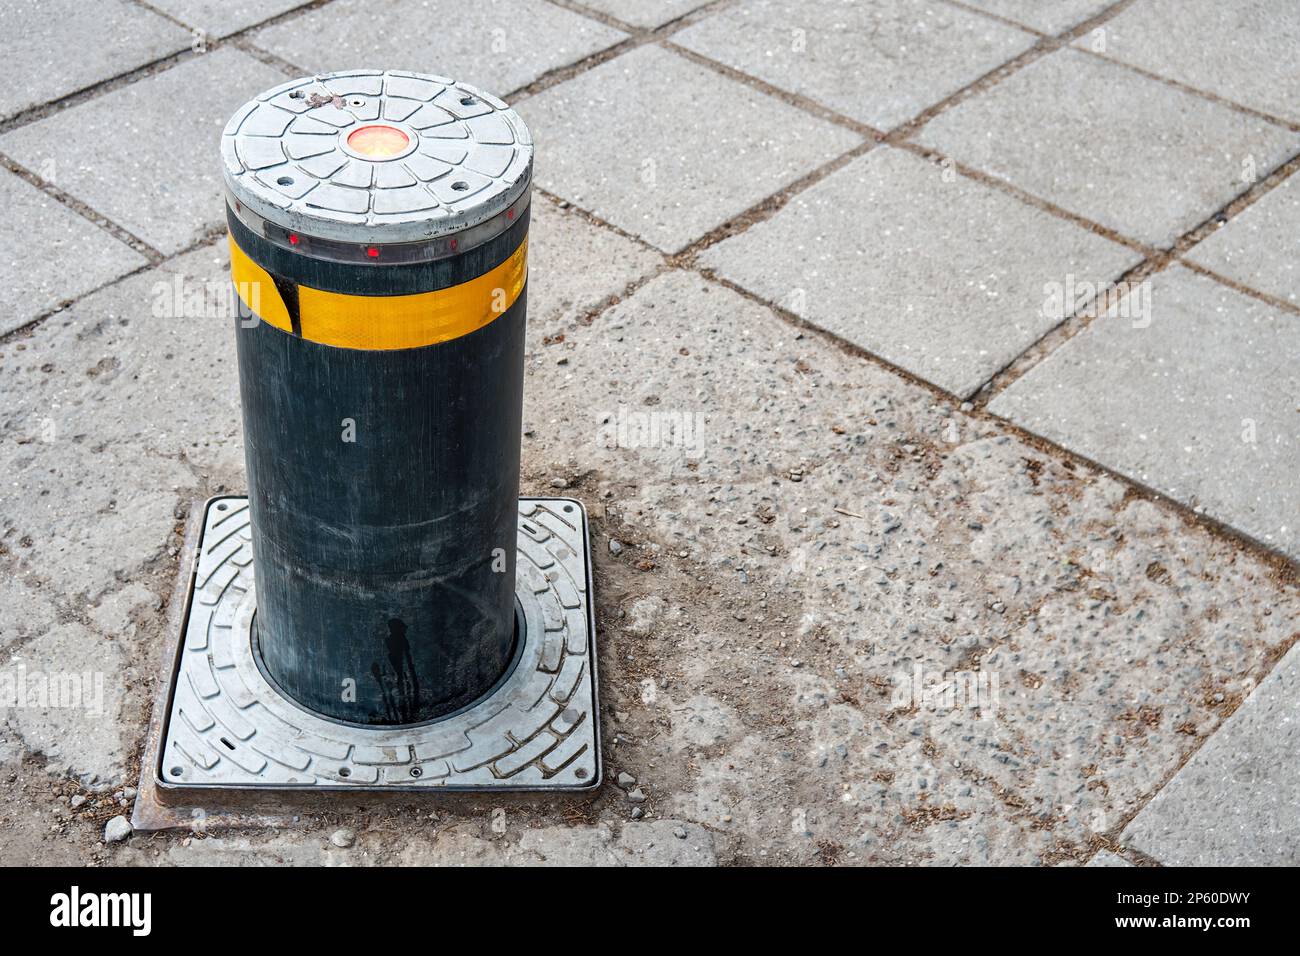 Black automatic lifting pole with yellow strip on pavement in city closeup. Equipment for vehicle traffic regulation on modern town road Stock Photo